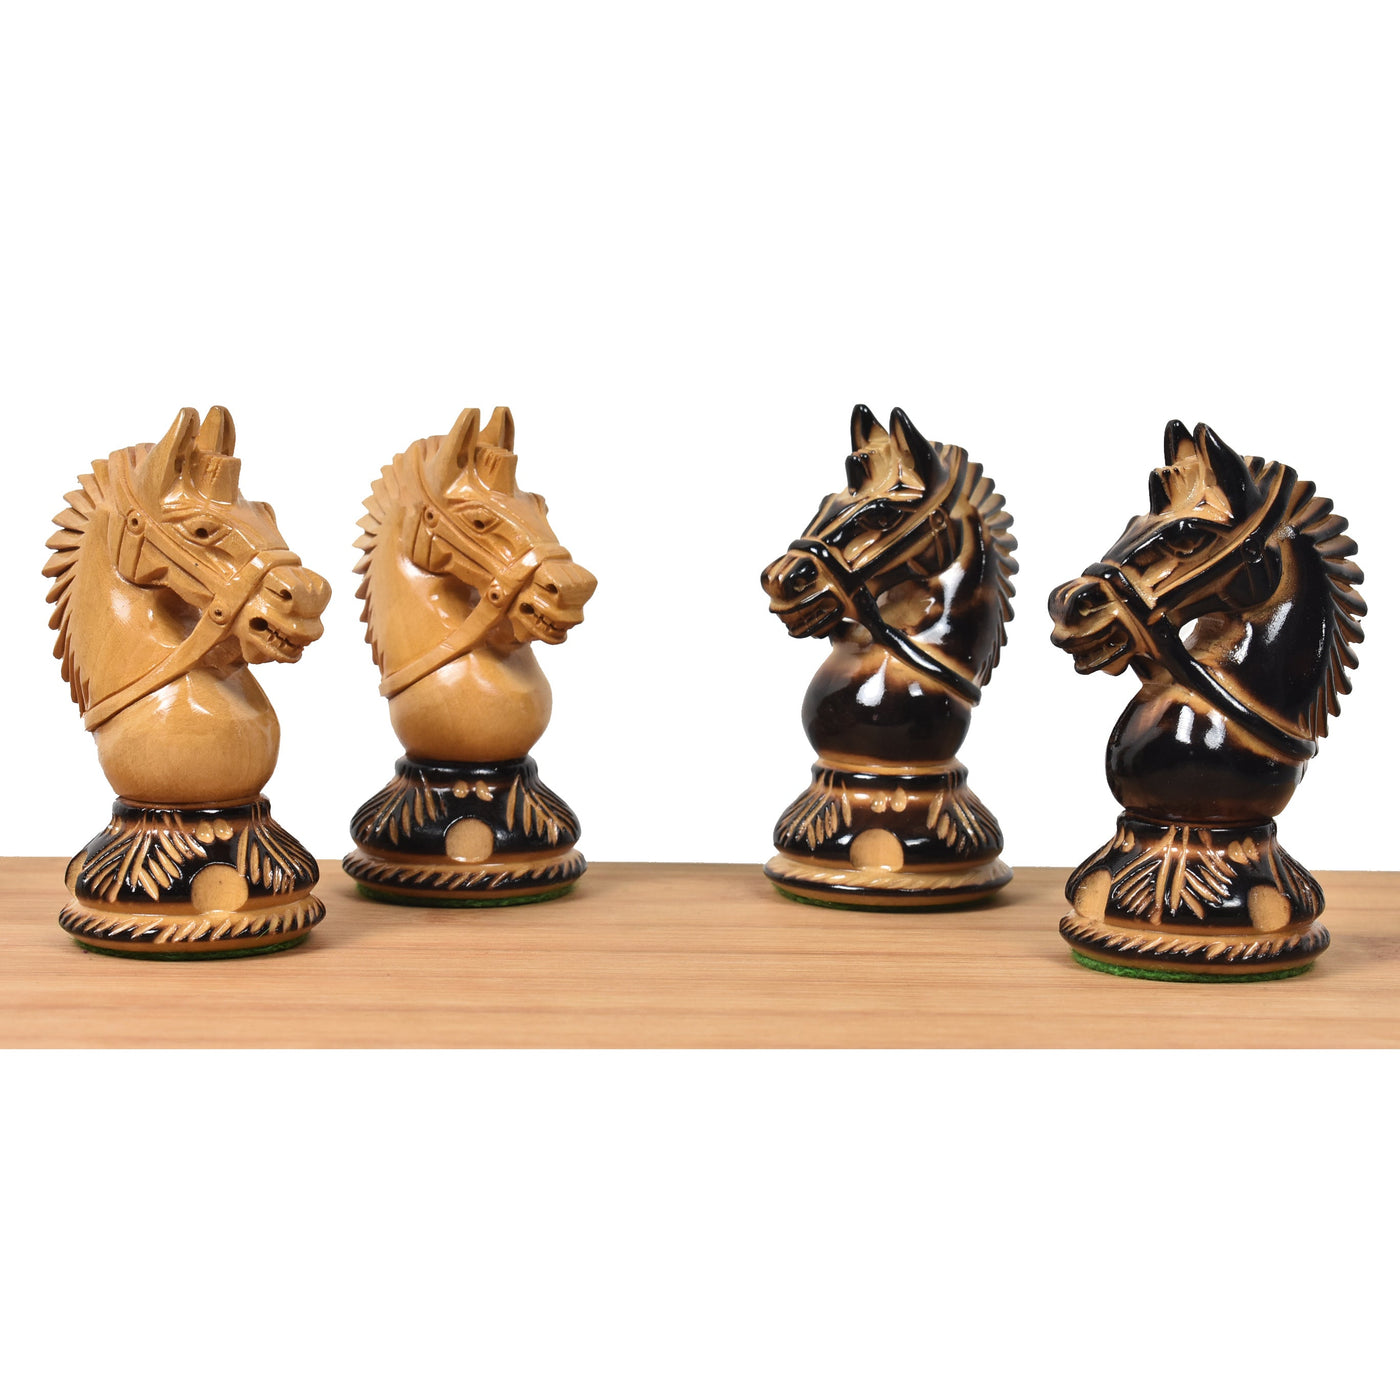 4.2" American Staunton Luxury Chess Pieces - Weighted Boxwood with 23" Large Ebony & Maple Wood Chessboard - sheesham borders and Leatherette Coffer Storage Box